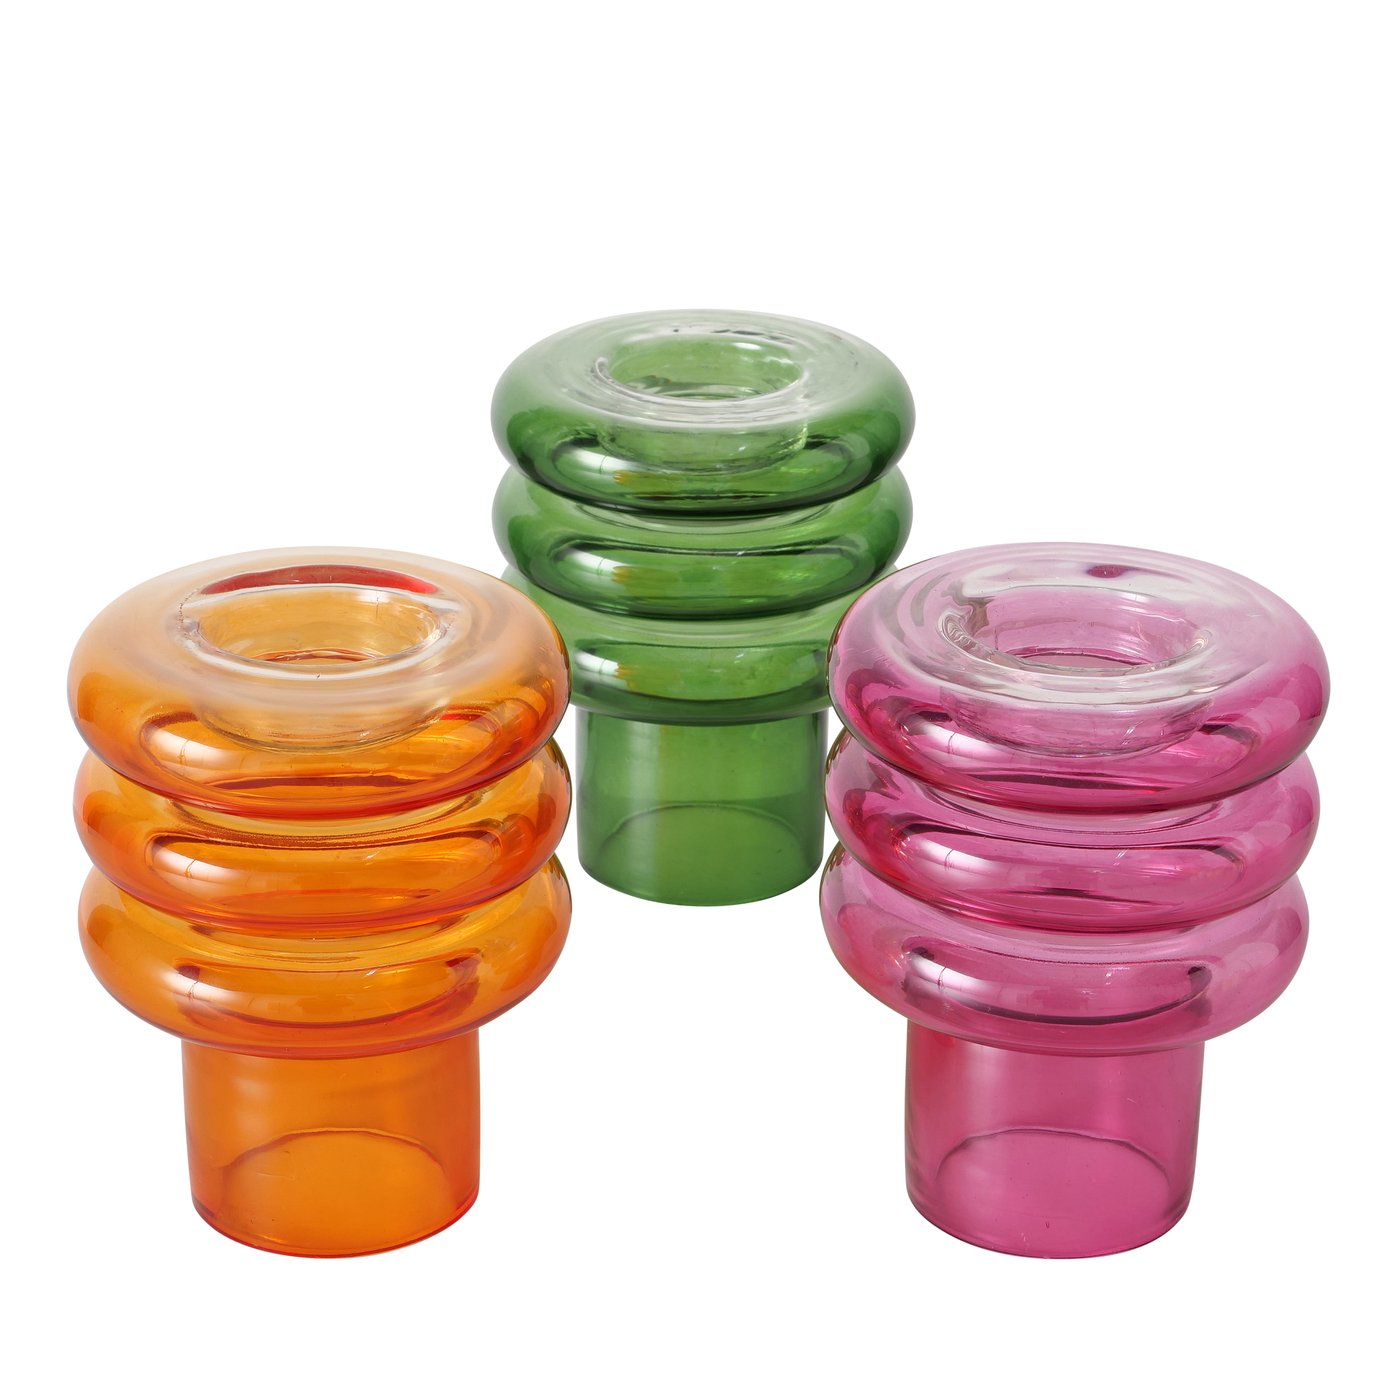 &Quirky Colour Pop Loops Reversible Glass Tealight Holder : Orange, Green or Pink